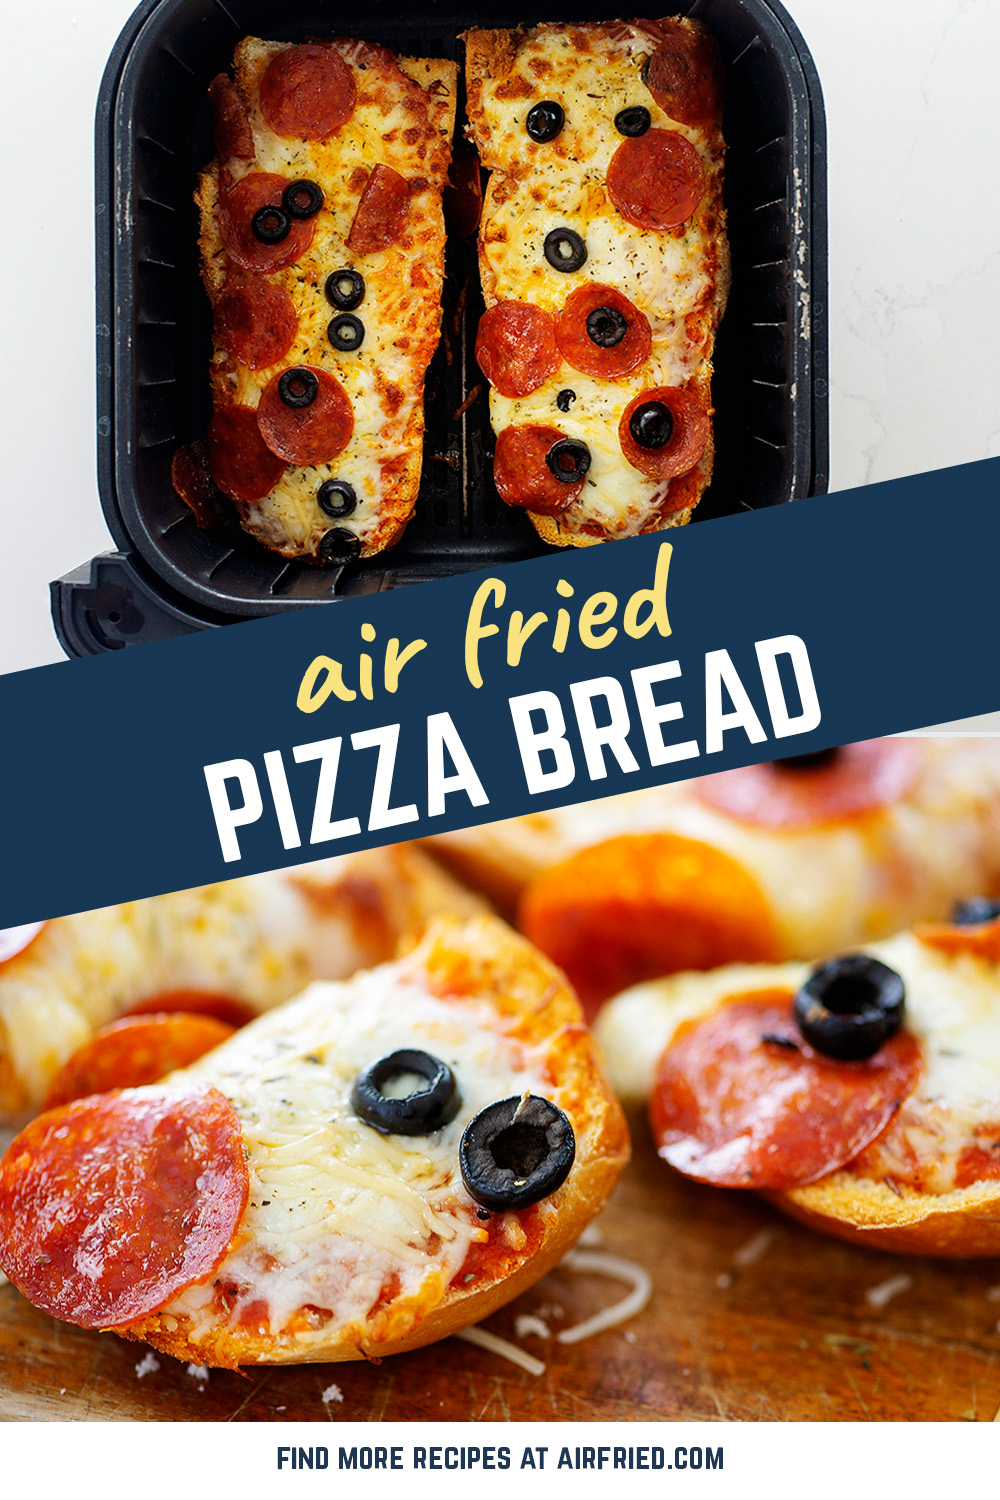 This air fryer pizza bread recipe gives you a crisp crust, fluffy center, and the perfect amount of toppings!